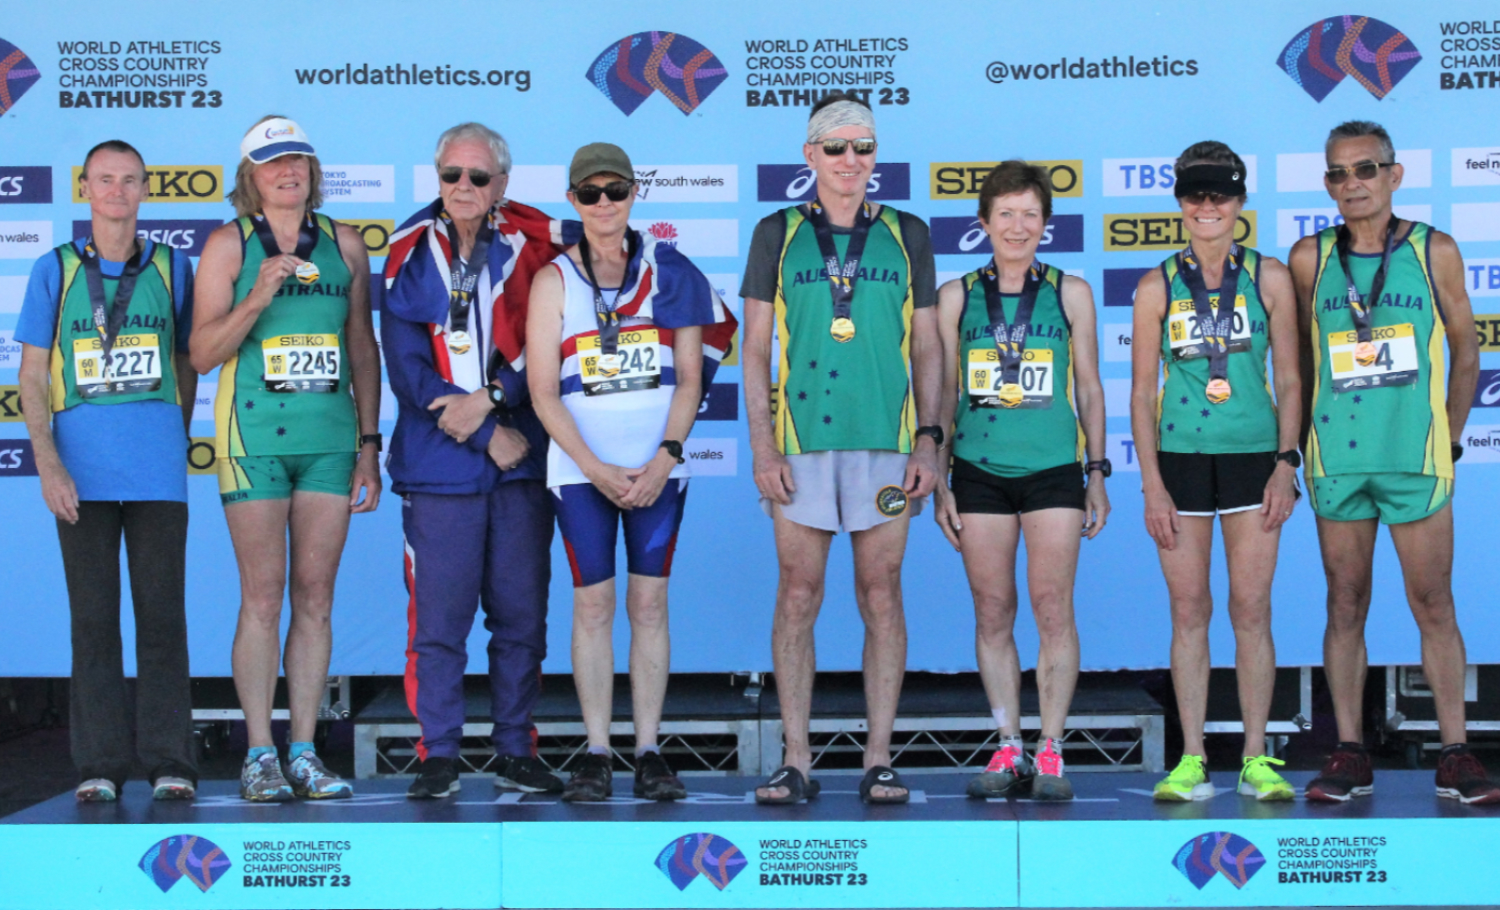 60+ medalists Victoria Gunn & Craig Downie (gold), Margaret Phillips & Kevin Dillon (silver), Helen Stanley & Bruce Graham (silver), and Robyn Basman & Jose Carvalho. Photo by Ken Farrell,